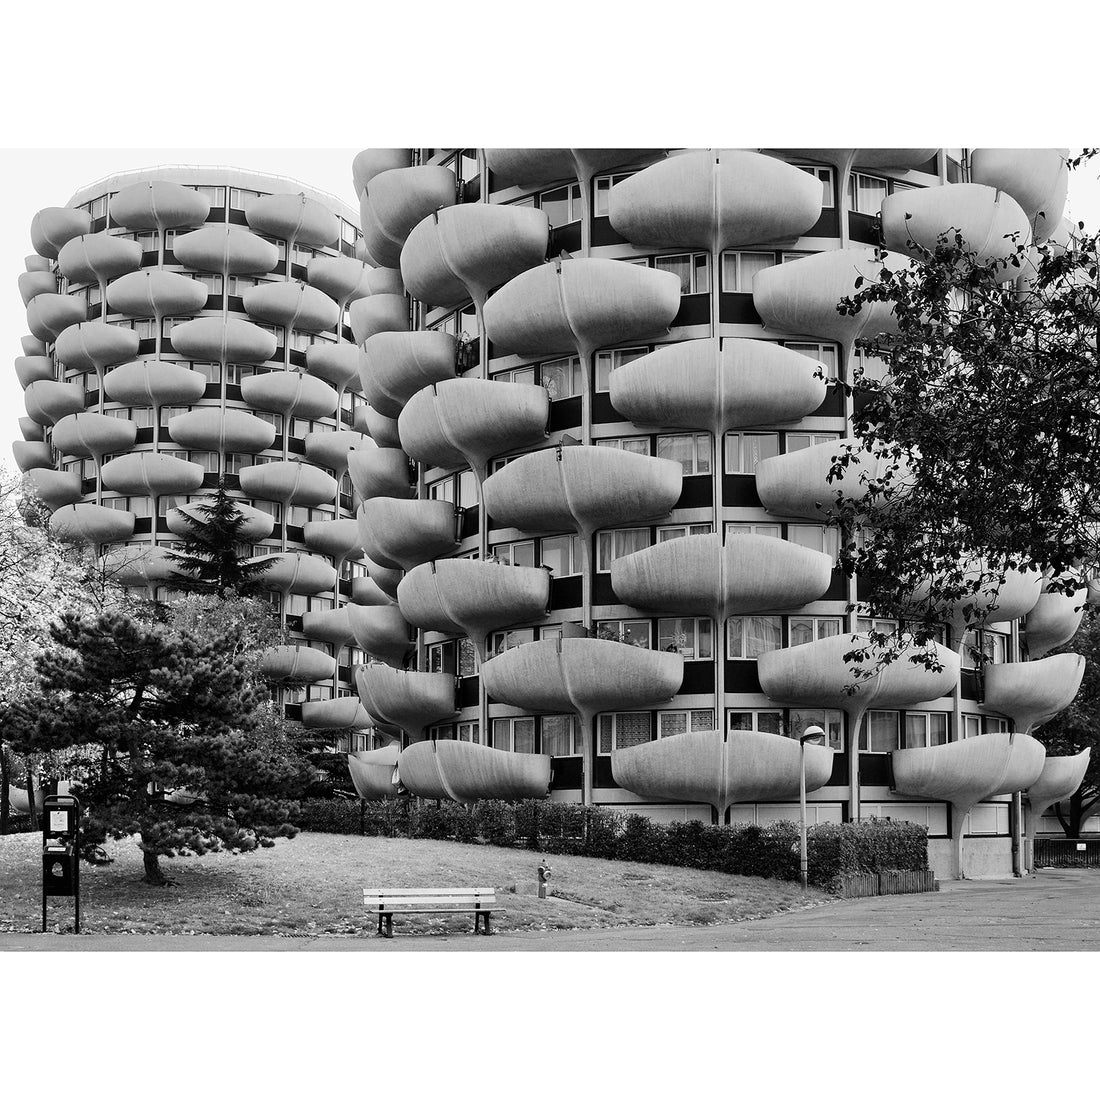 Brutalist Paris - Book coming soon with your help